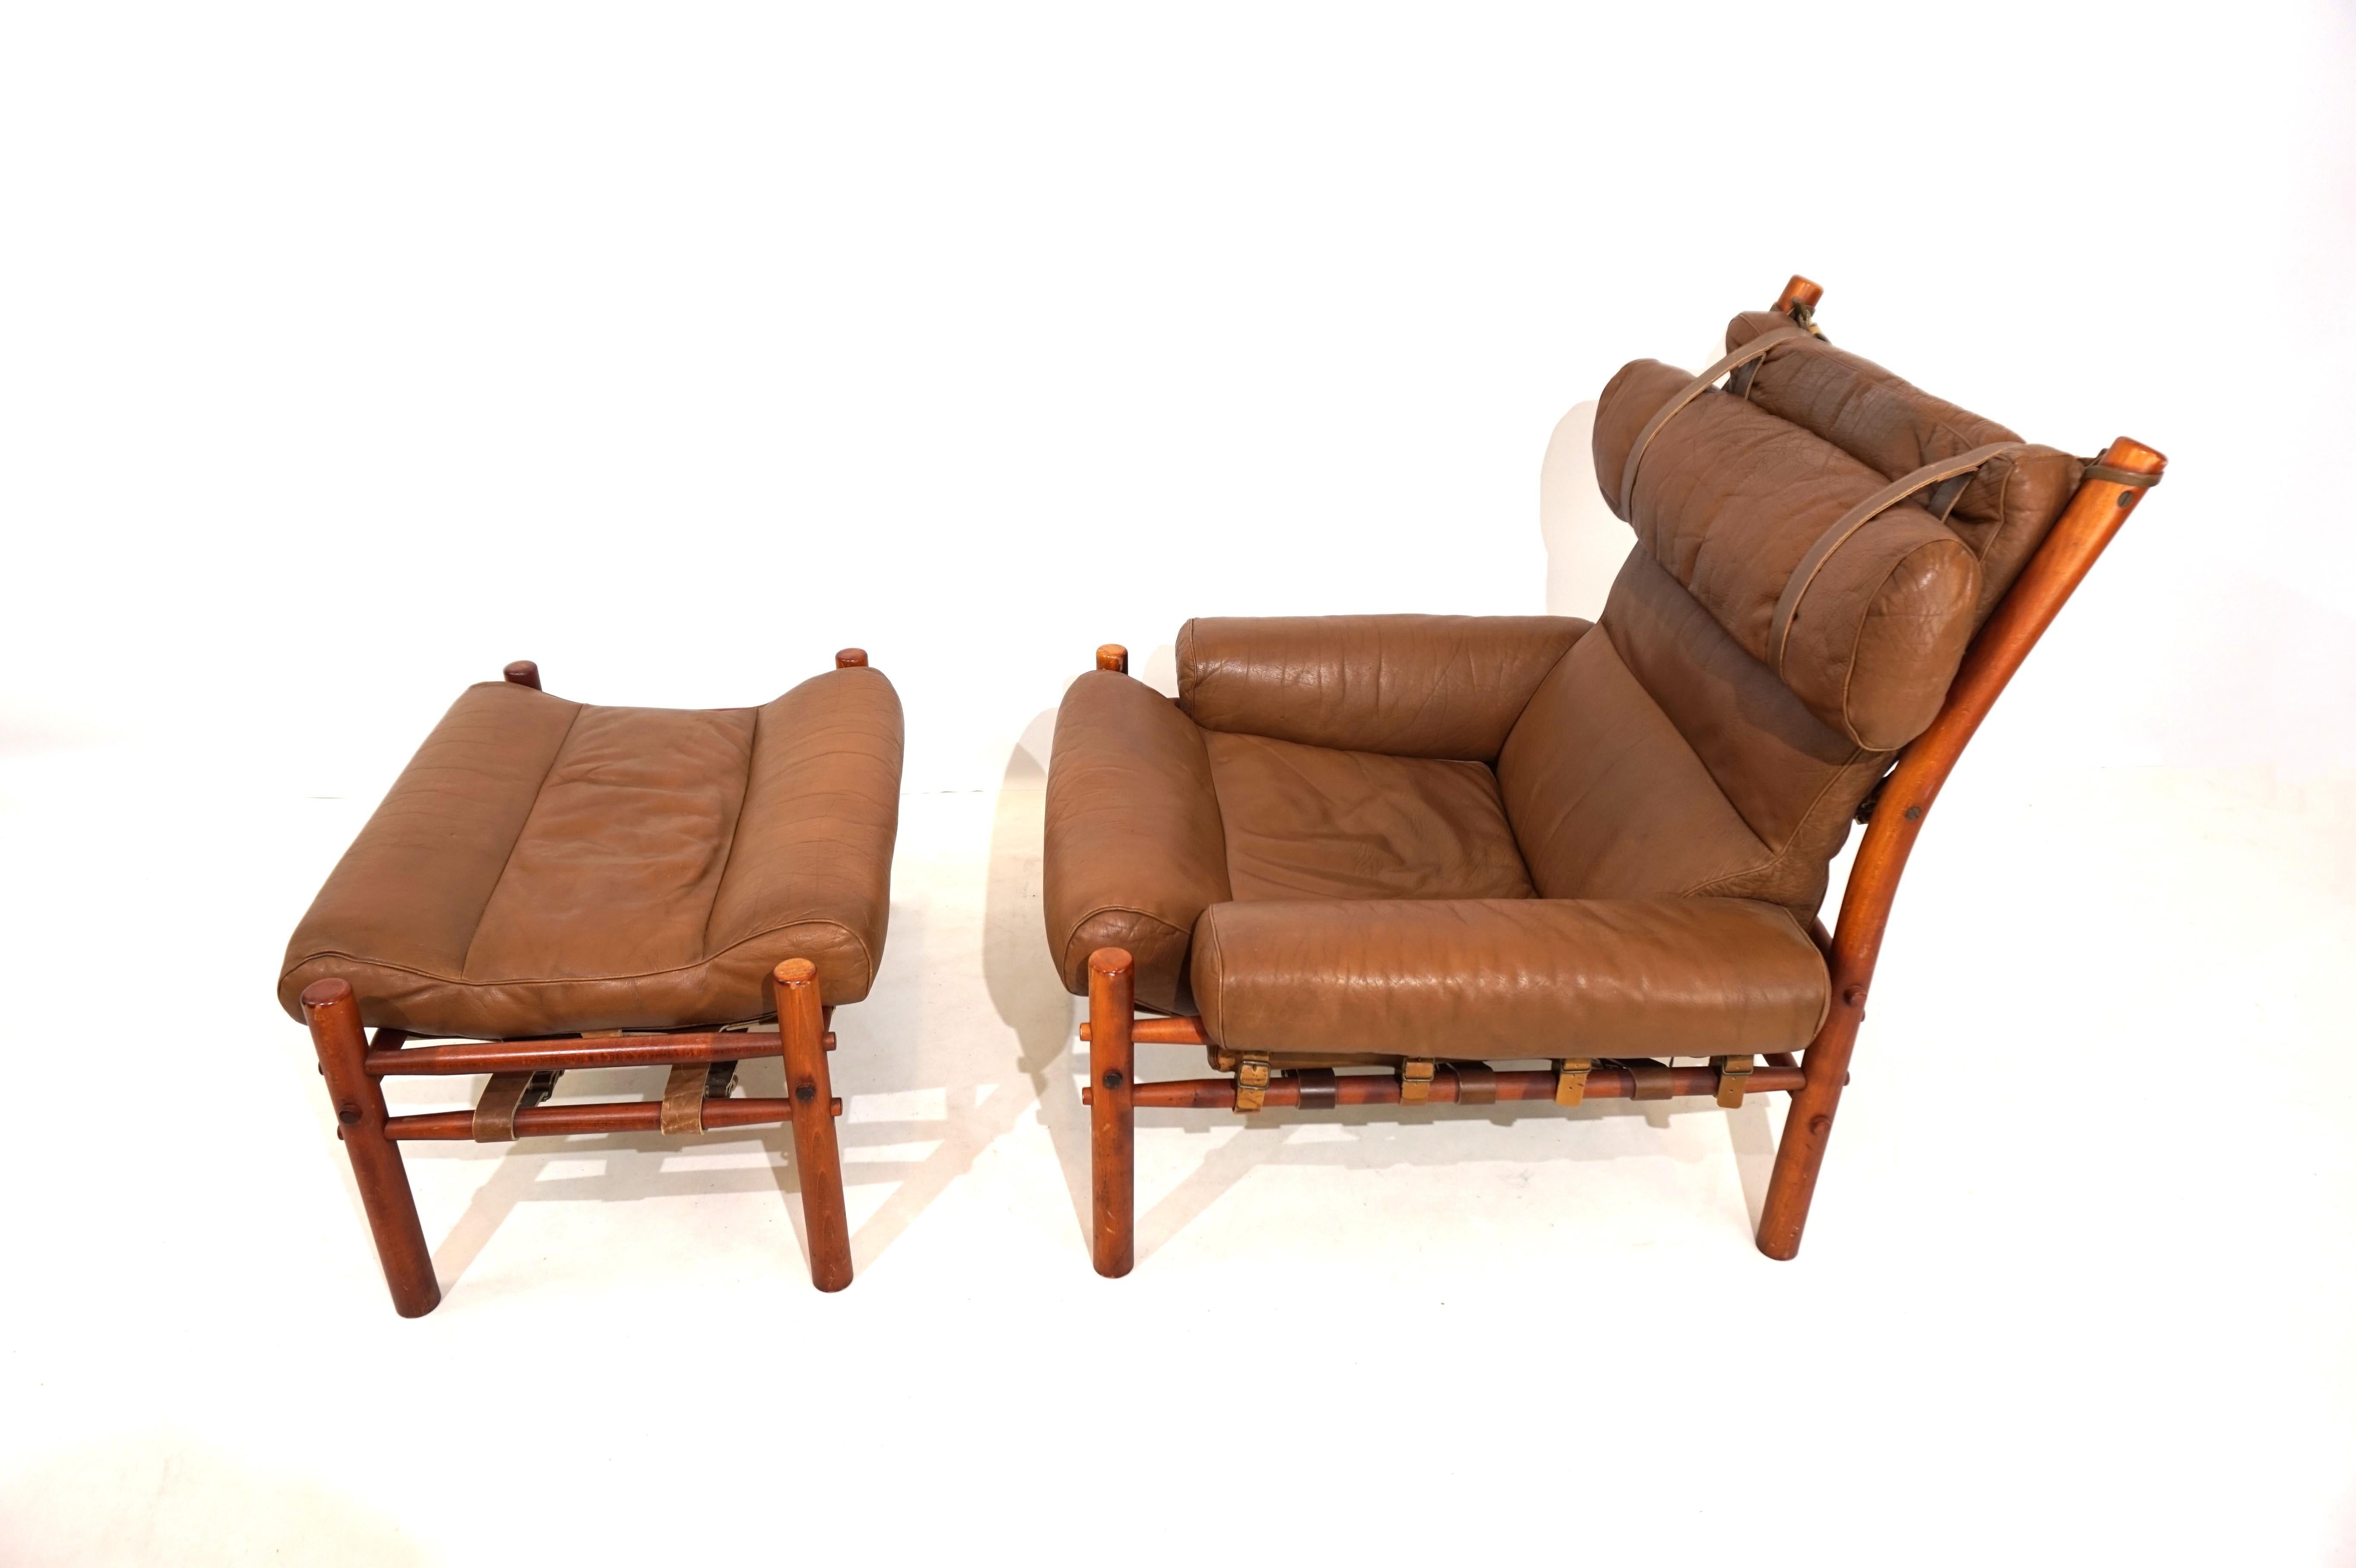 Arne Norell Inca chair with ottoman for Norell AB In Good Condition For Sale In Ludwigslust, DE